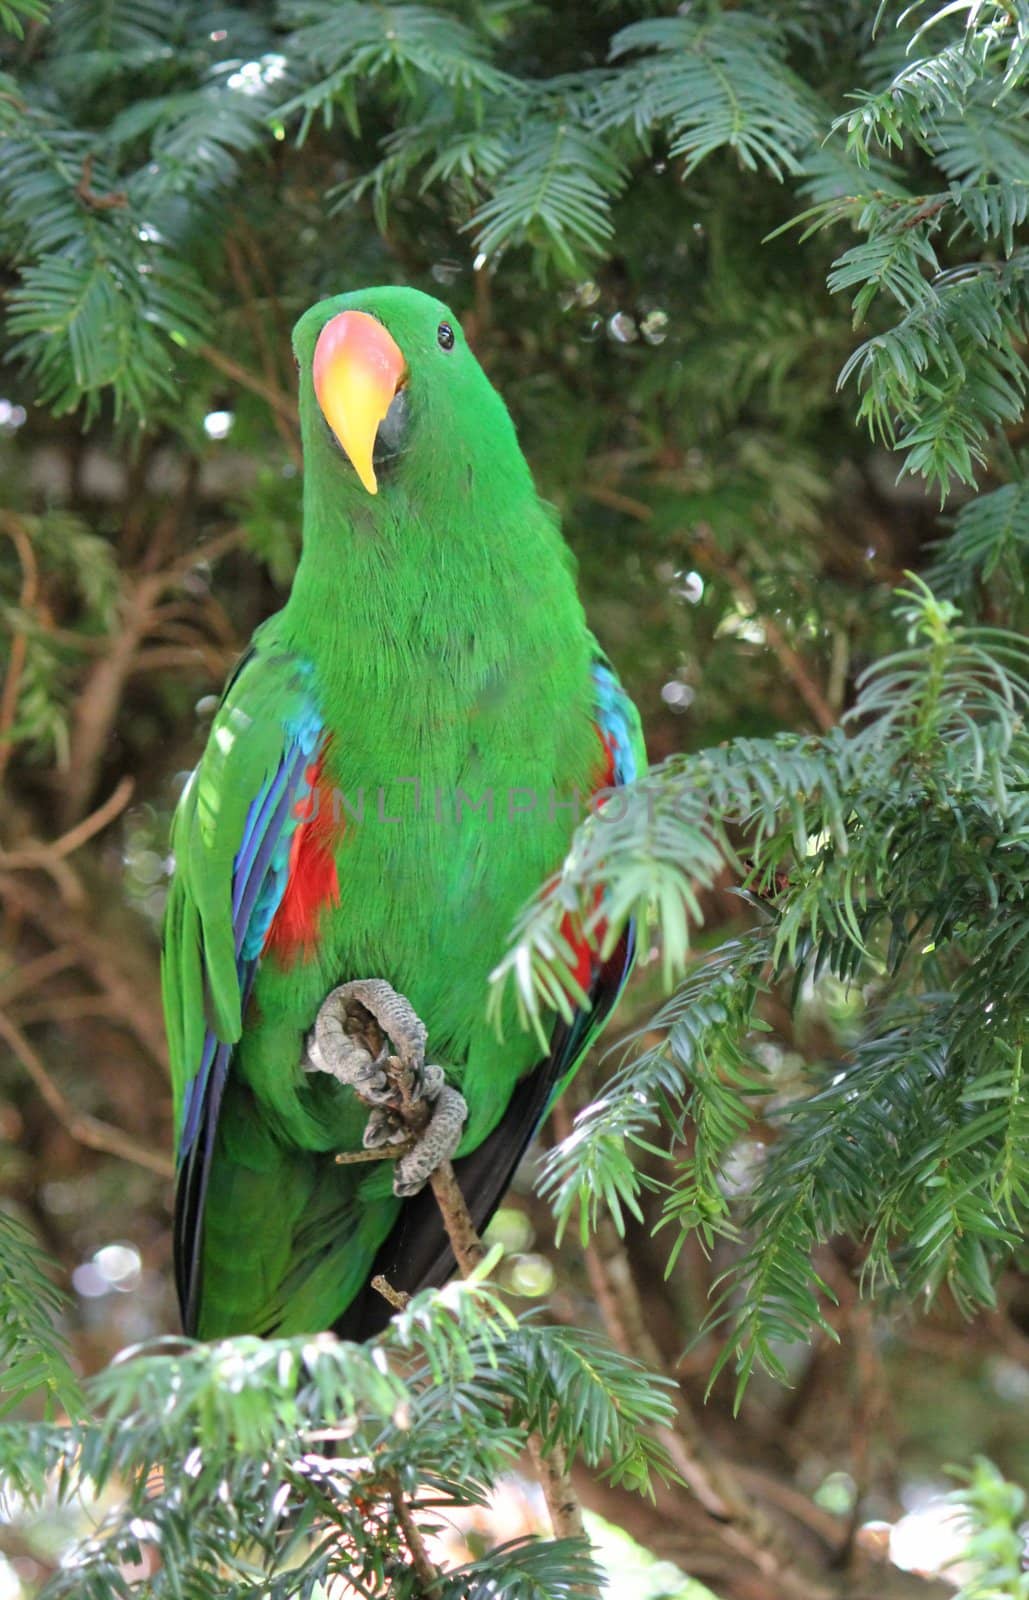 Green eclectus parrot with its yellow beak standing on a branch and surrounded by leaves